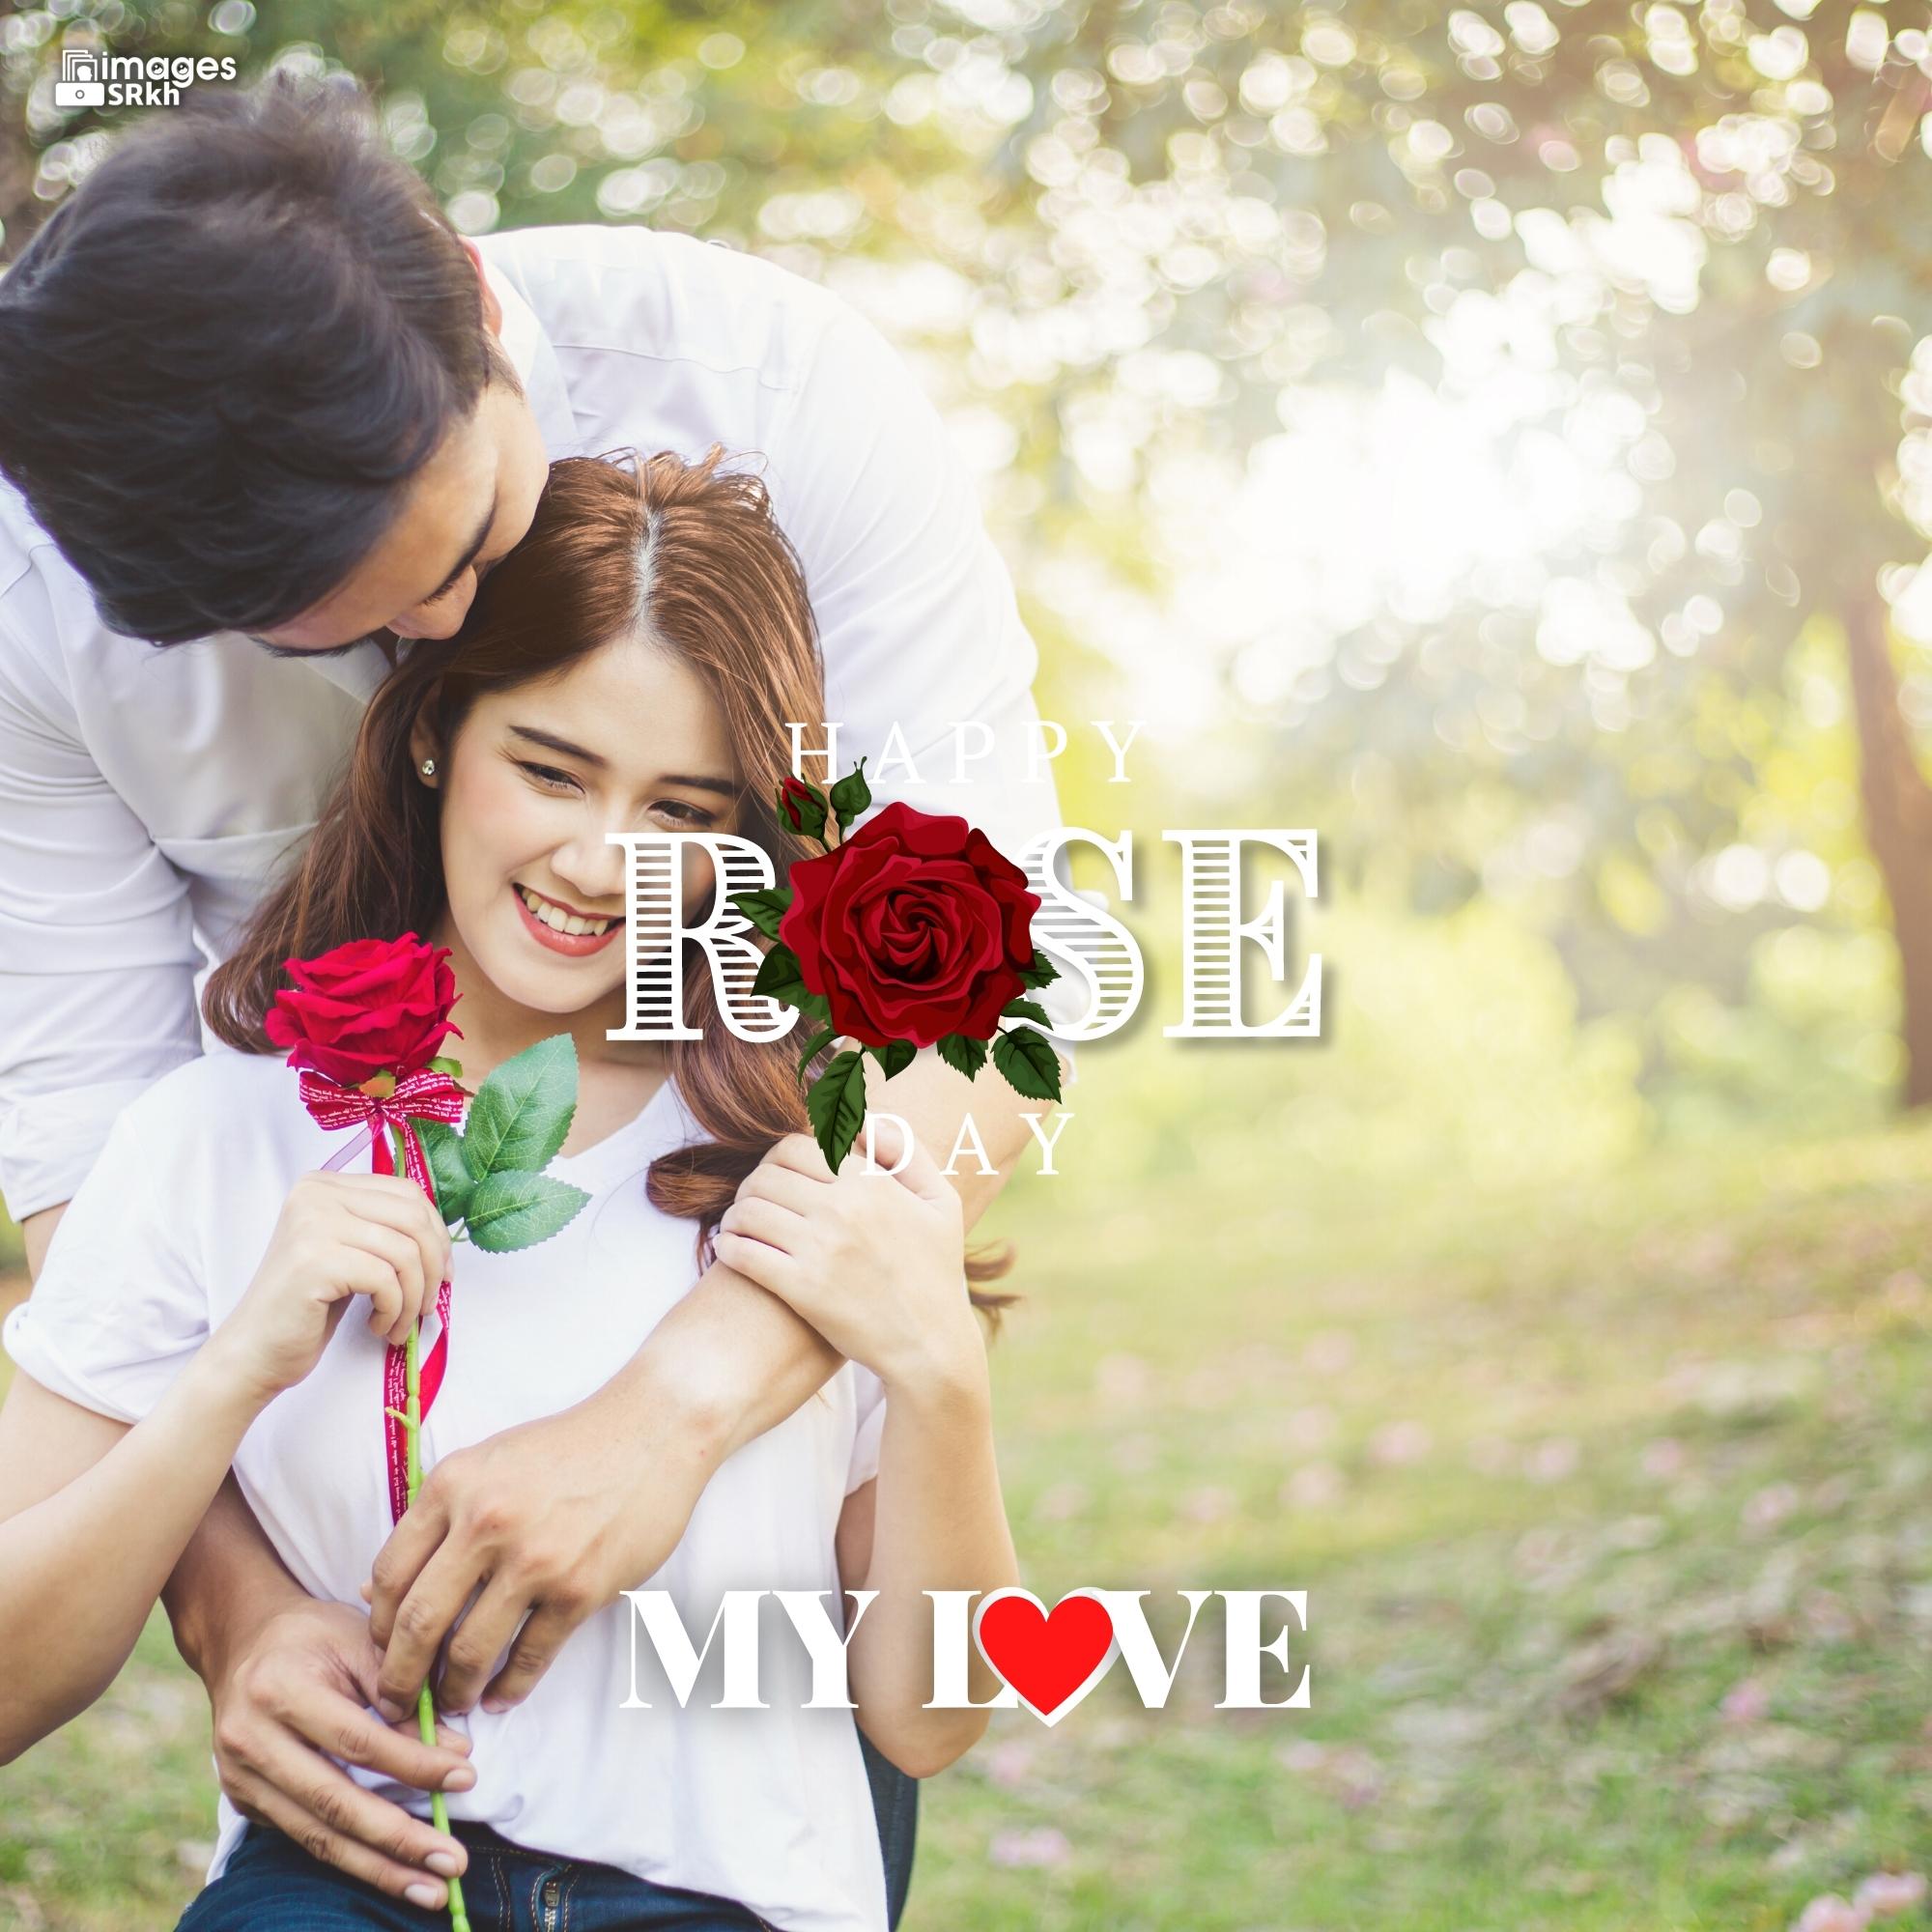 Happy Rose Day My Love (31) | HD IMAGES